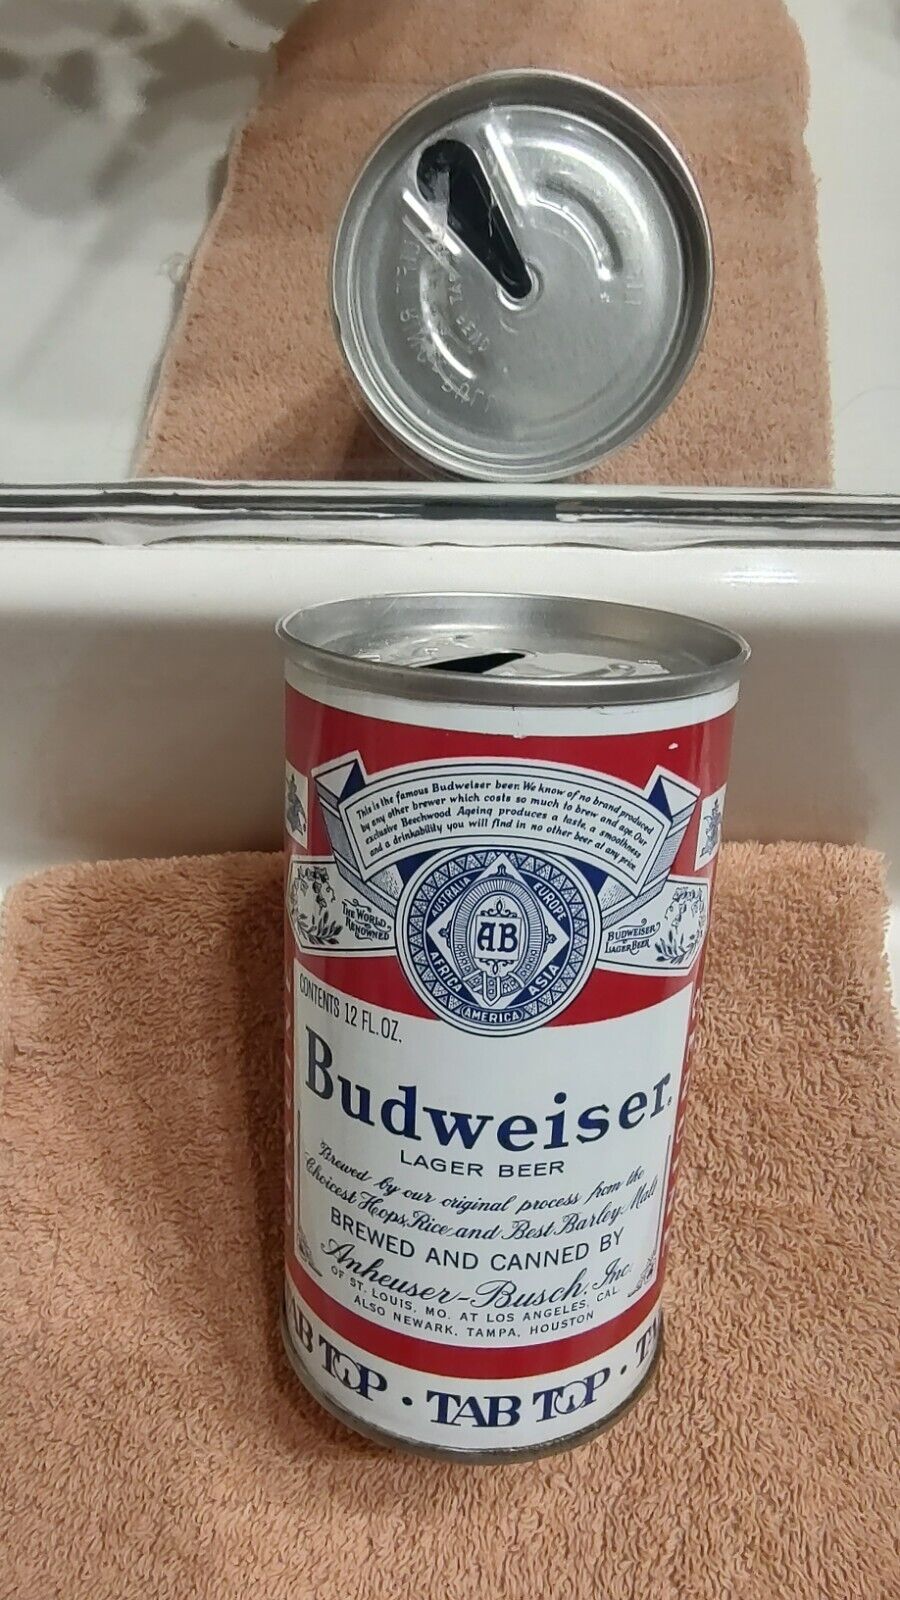 indoor 1960s BUD, early TAB TOP, beer can, LOS ANGELES California *Near Mint*